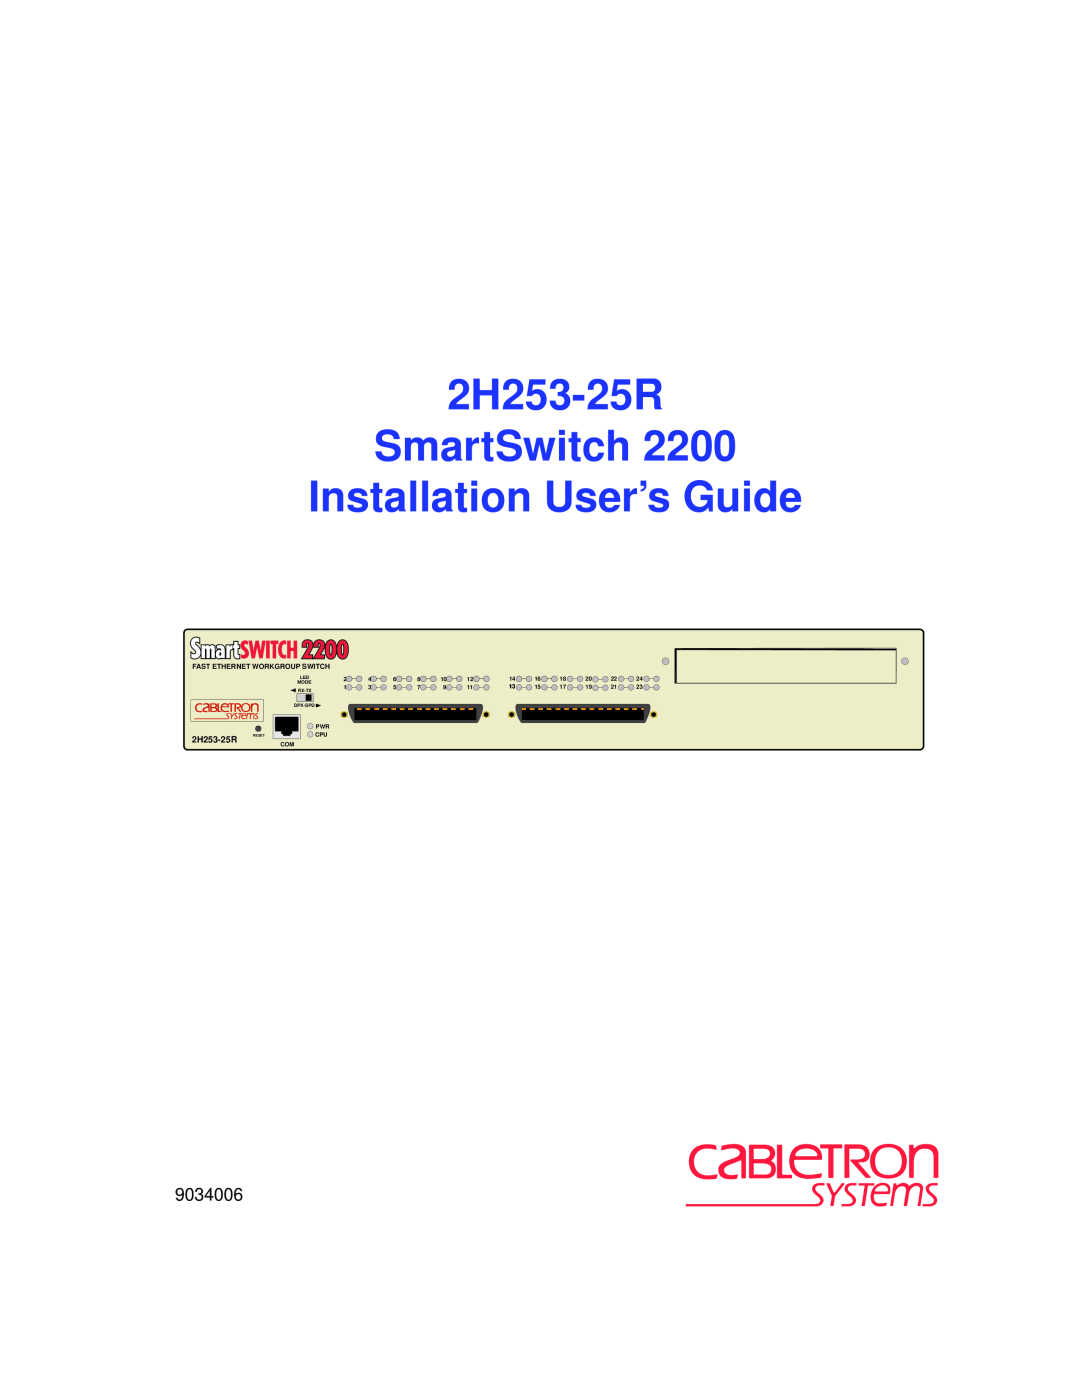 Cabletron Systems manual 2H253-25R SmartSwitch Installation User’s Guide, Fast Ethernet Workgroup Switch, Mode, Rx-Tx 